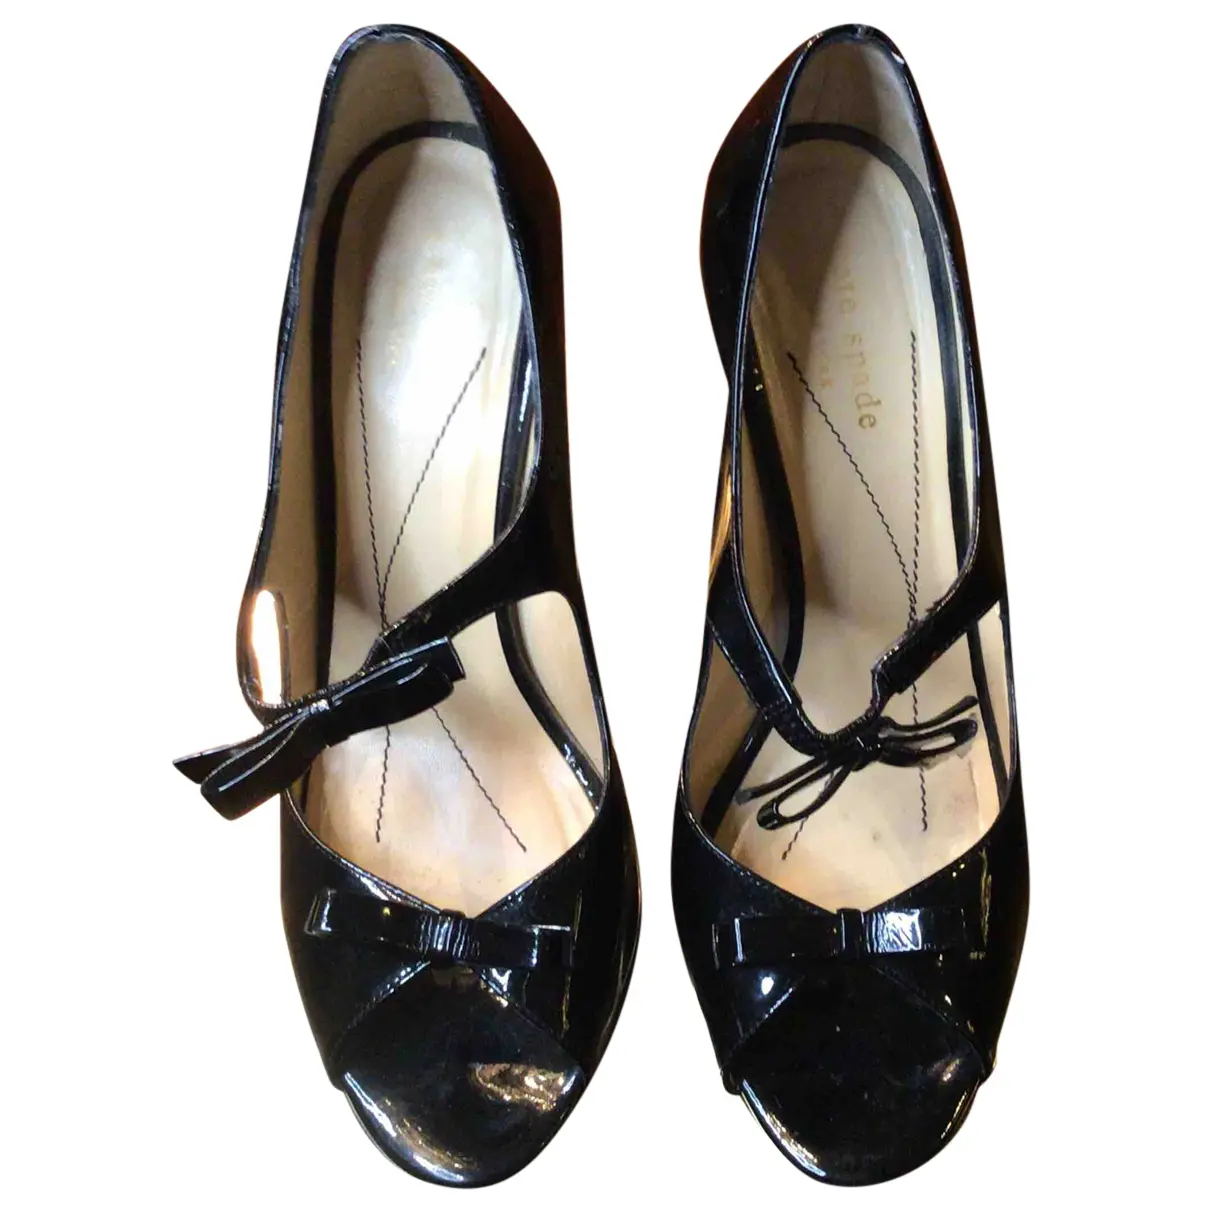 Patent leather heels Kate Spade